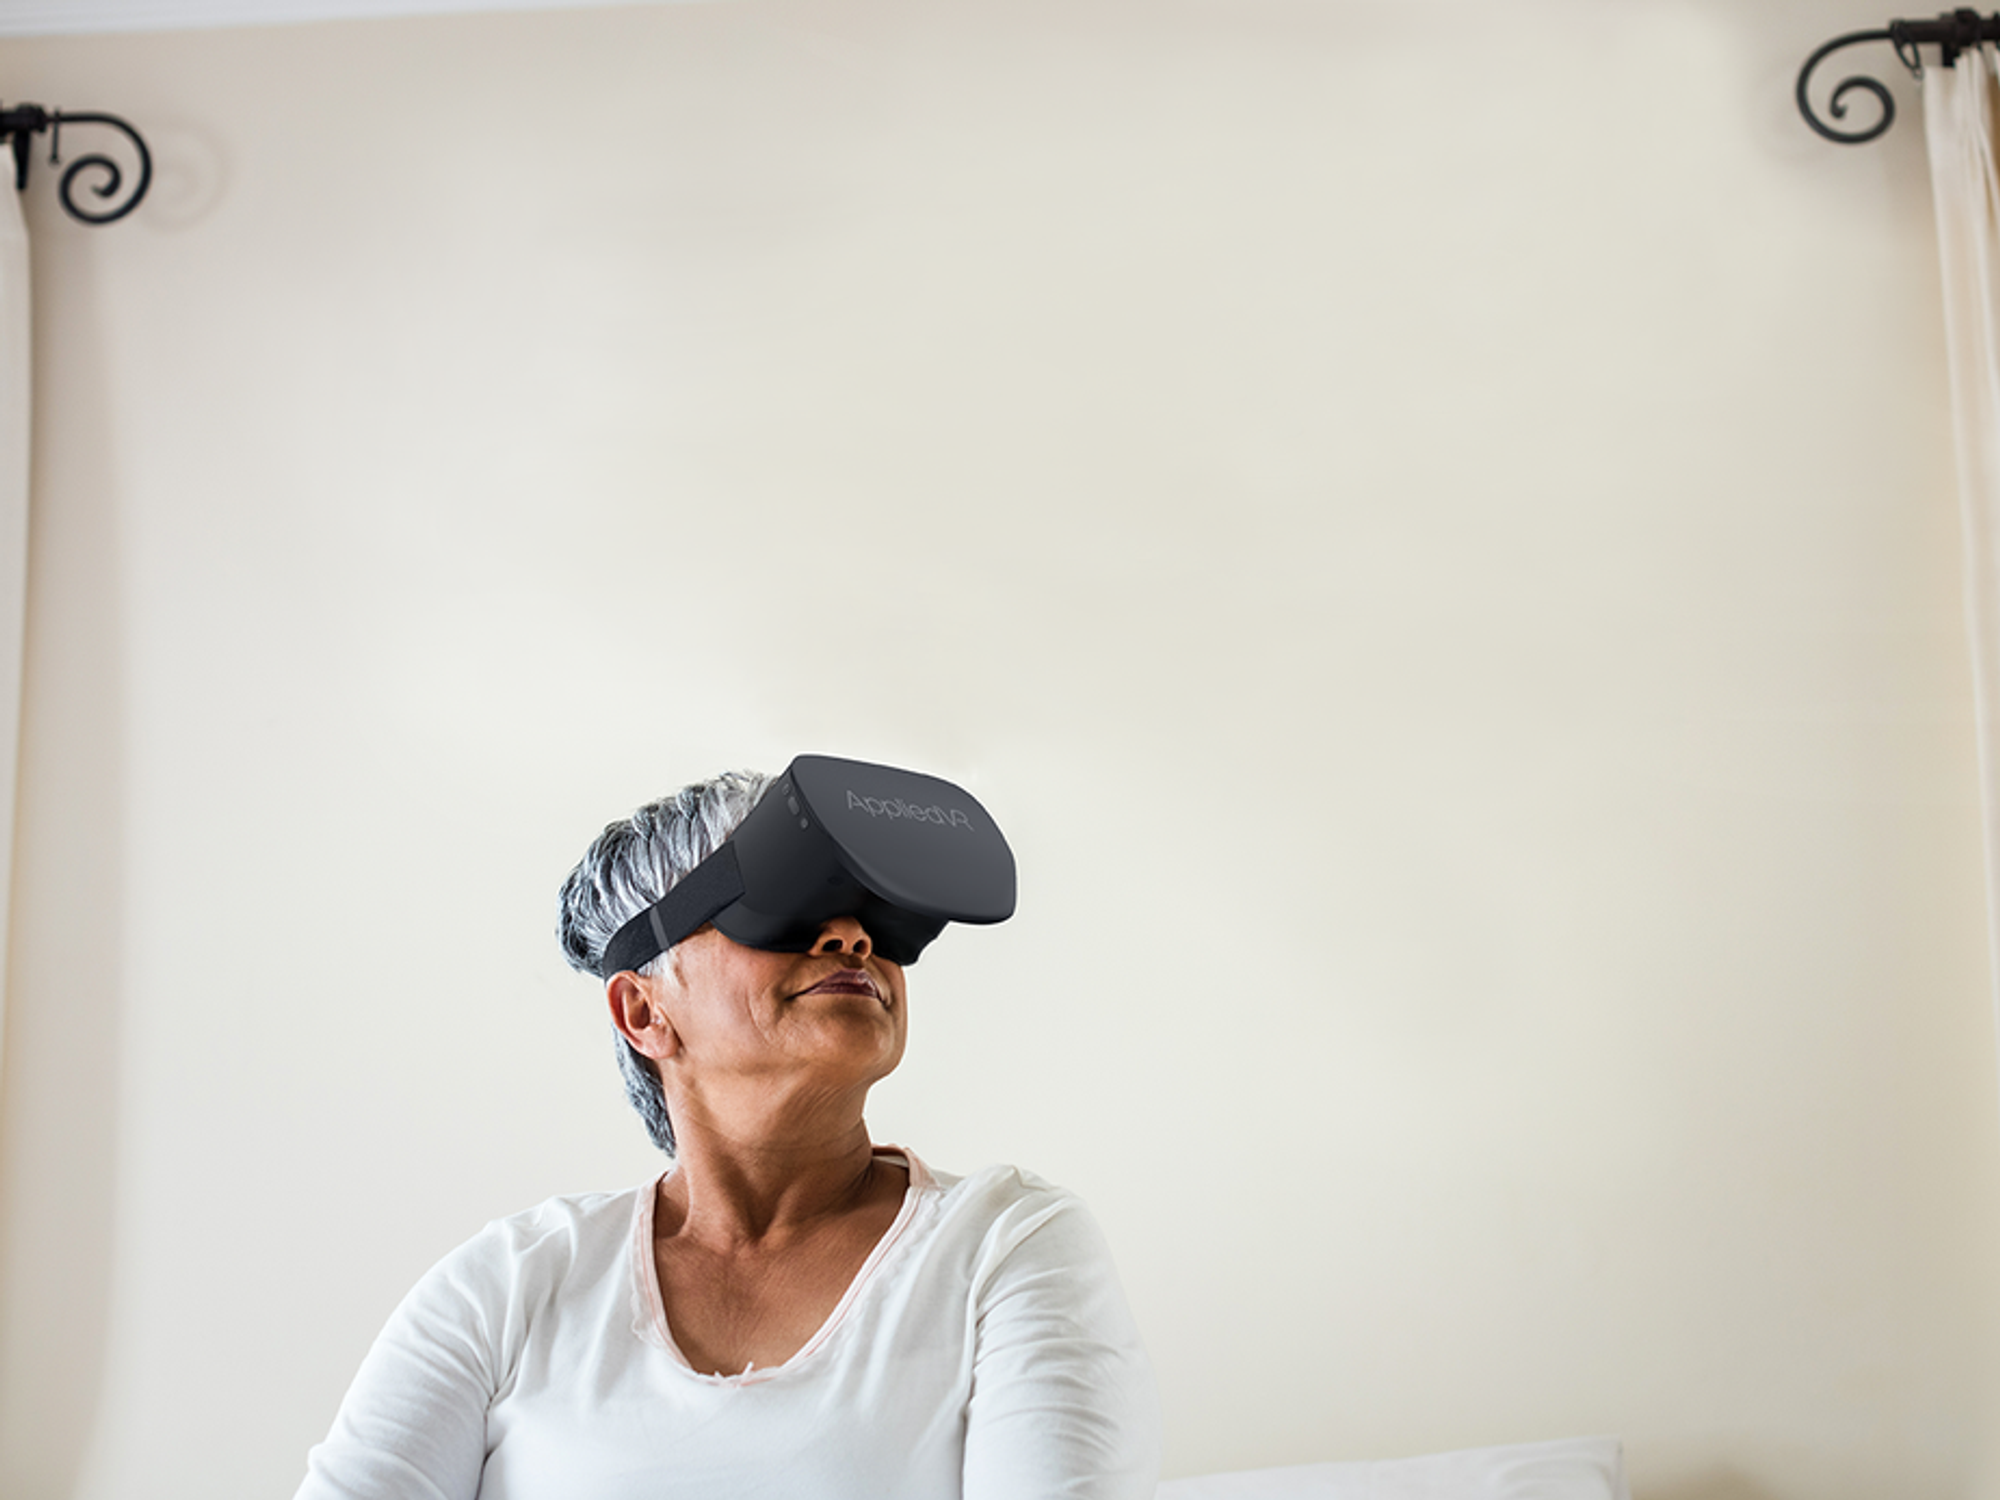 AppliedVR Becomes the First Virtual Reality Pain Management Platform to Get FDA Approval